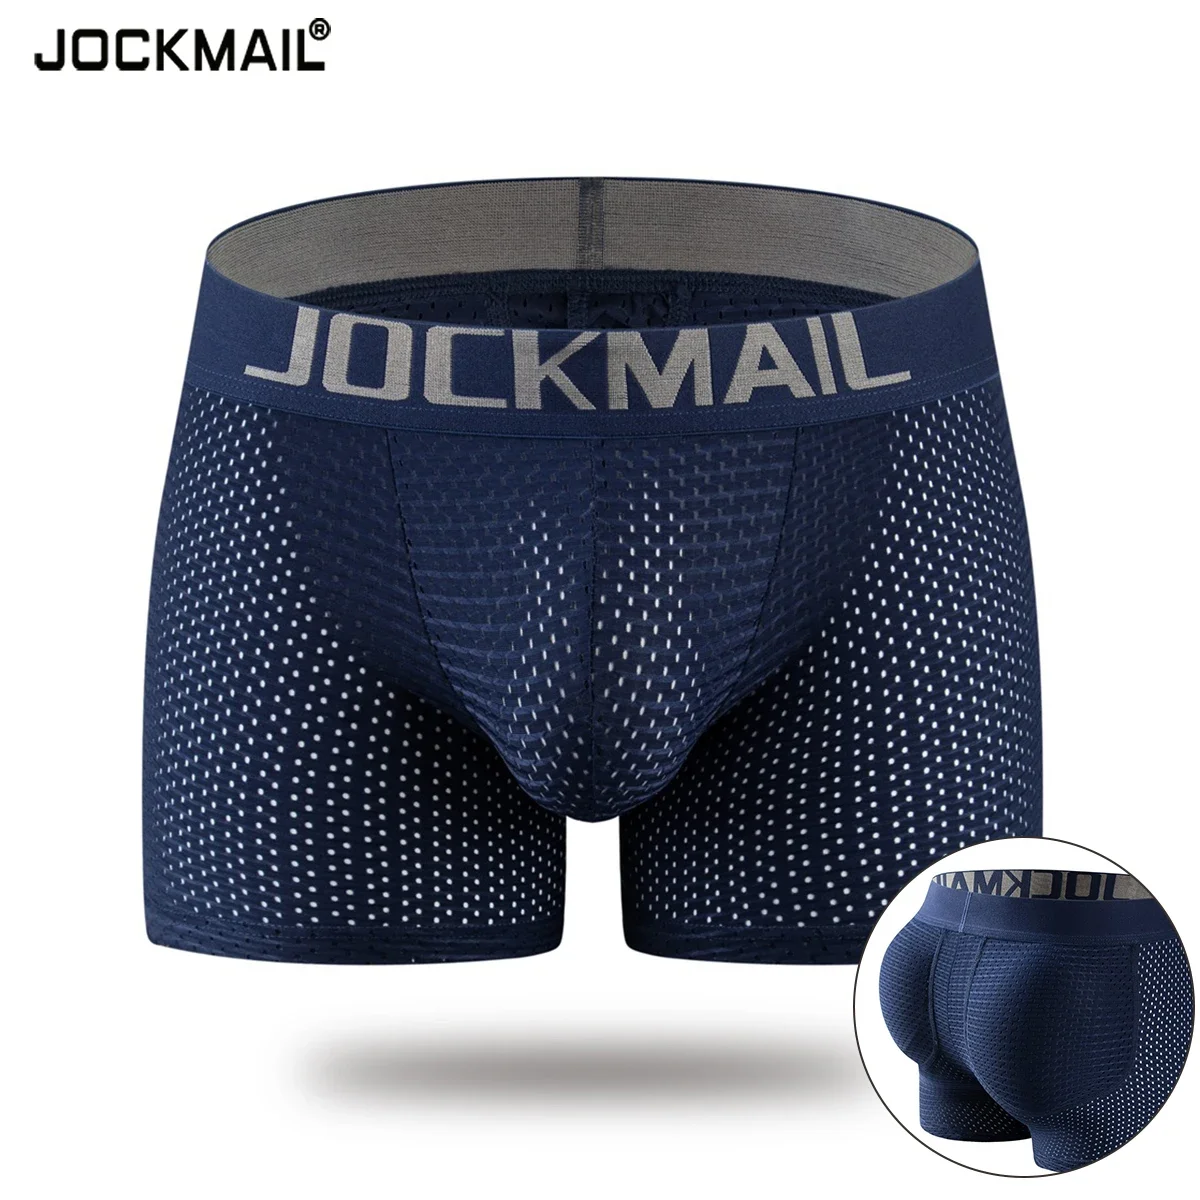 JOCKMAIL Sexy Underwear Men's Boxer Shorts Mesh U Pouch Sexy Underpants with Hip Pads Cueca Boxer Men Sleep Bottoms Male Trunks sexy men briefs oil skinny shorts panties bulge pouch low waist underwear solid ultra thin mesh underpants stretch lingerie